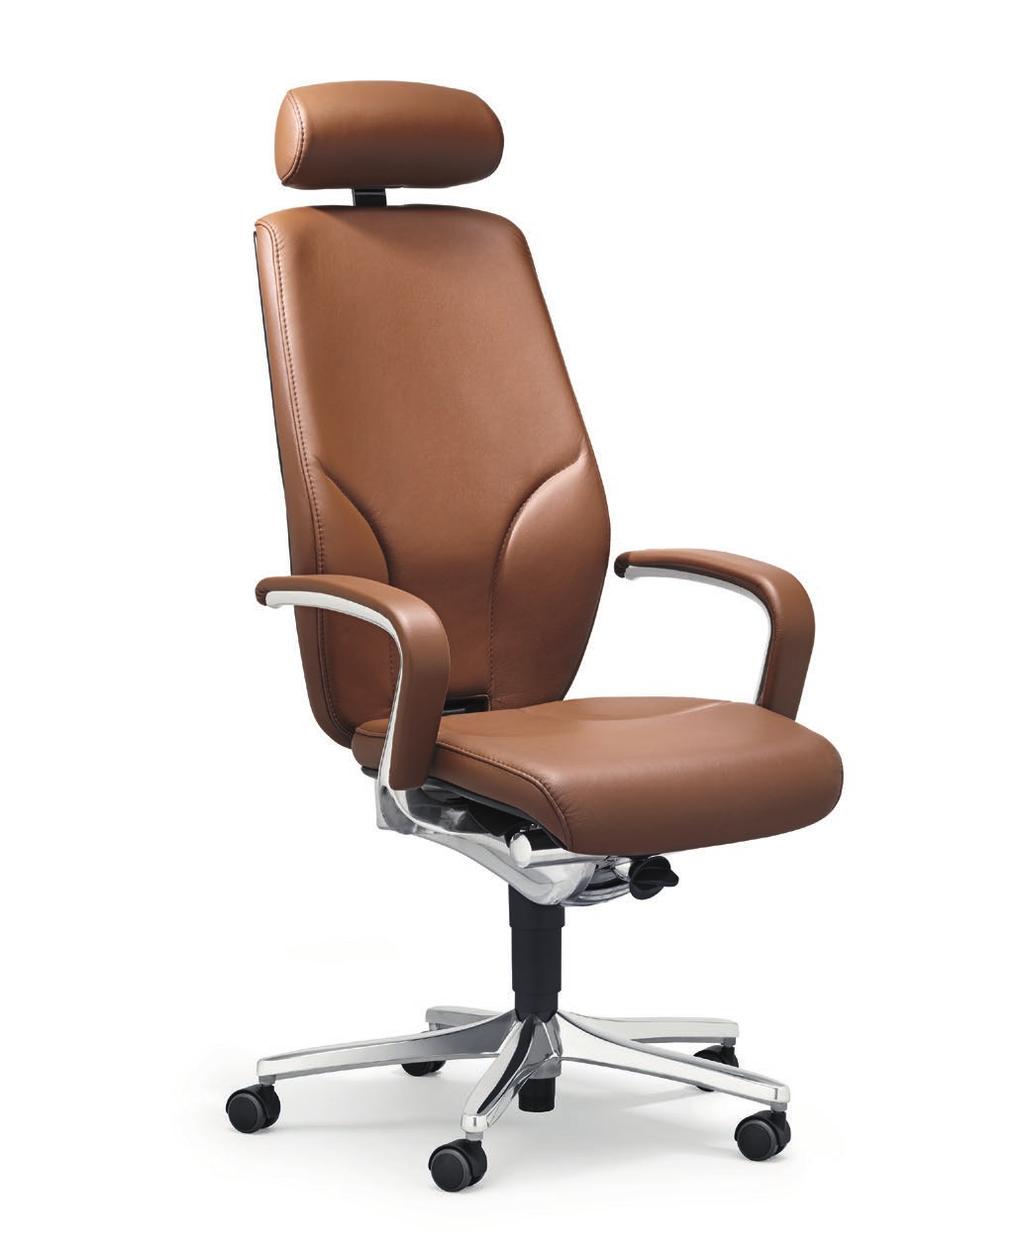 giroflex 64 giroflex 64 EXECUTIVE ARMCHAIR POLTRONA DIREZIONALE Comfortable sitting. The executive armchair is convincing with first-class workmanship and relaxed sitting.